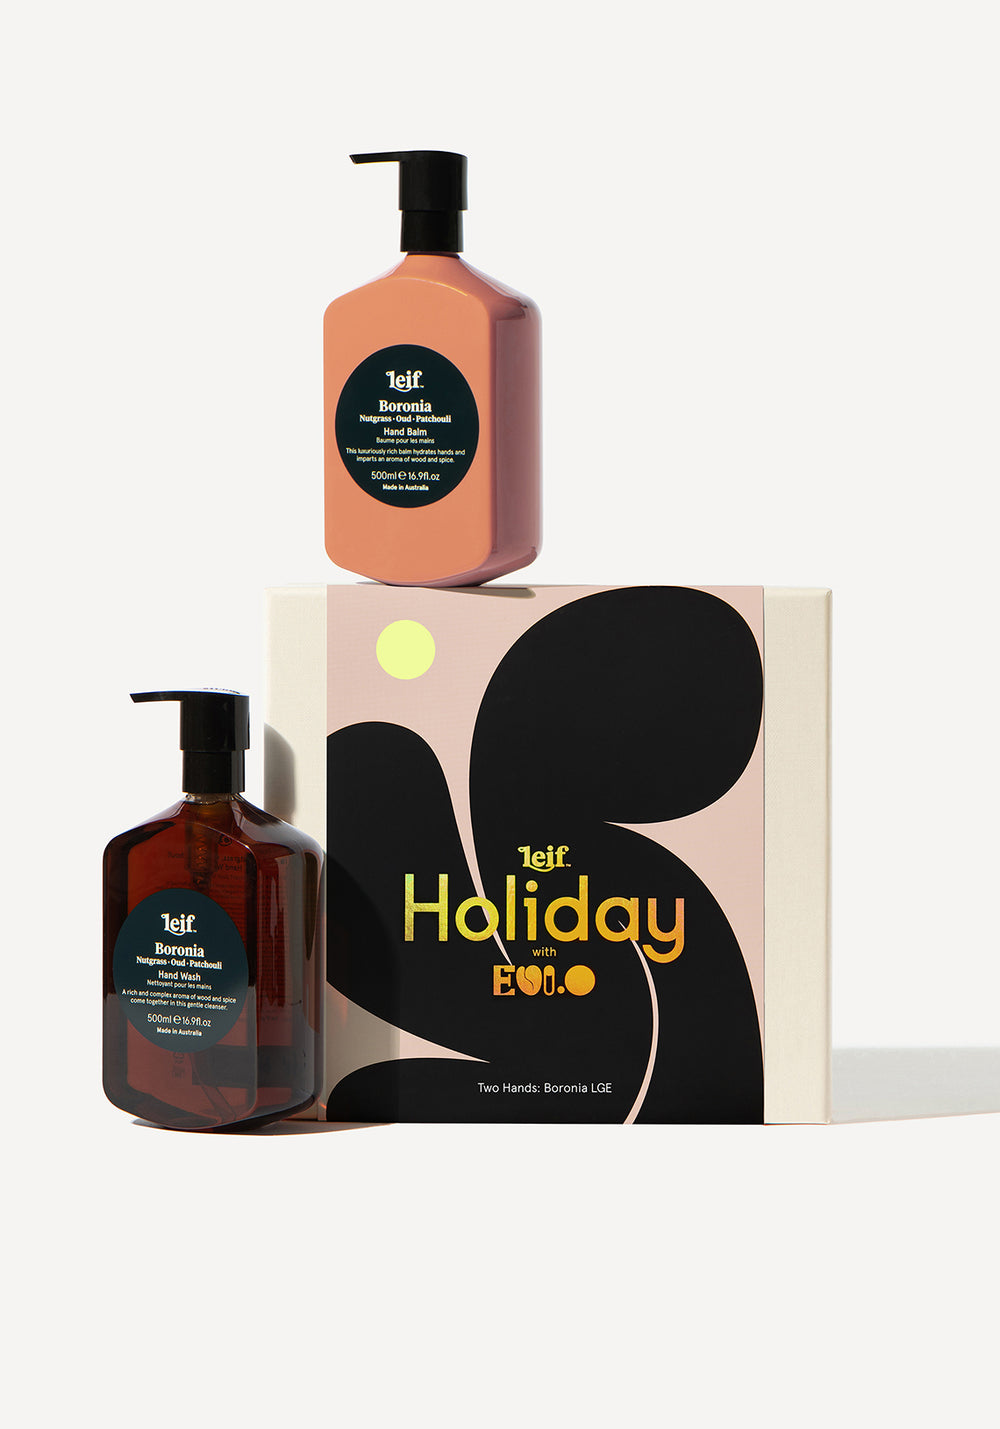 LIMITED EDITION HOLIDAY WITH EVI O TWO HANDS BORONIA